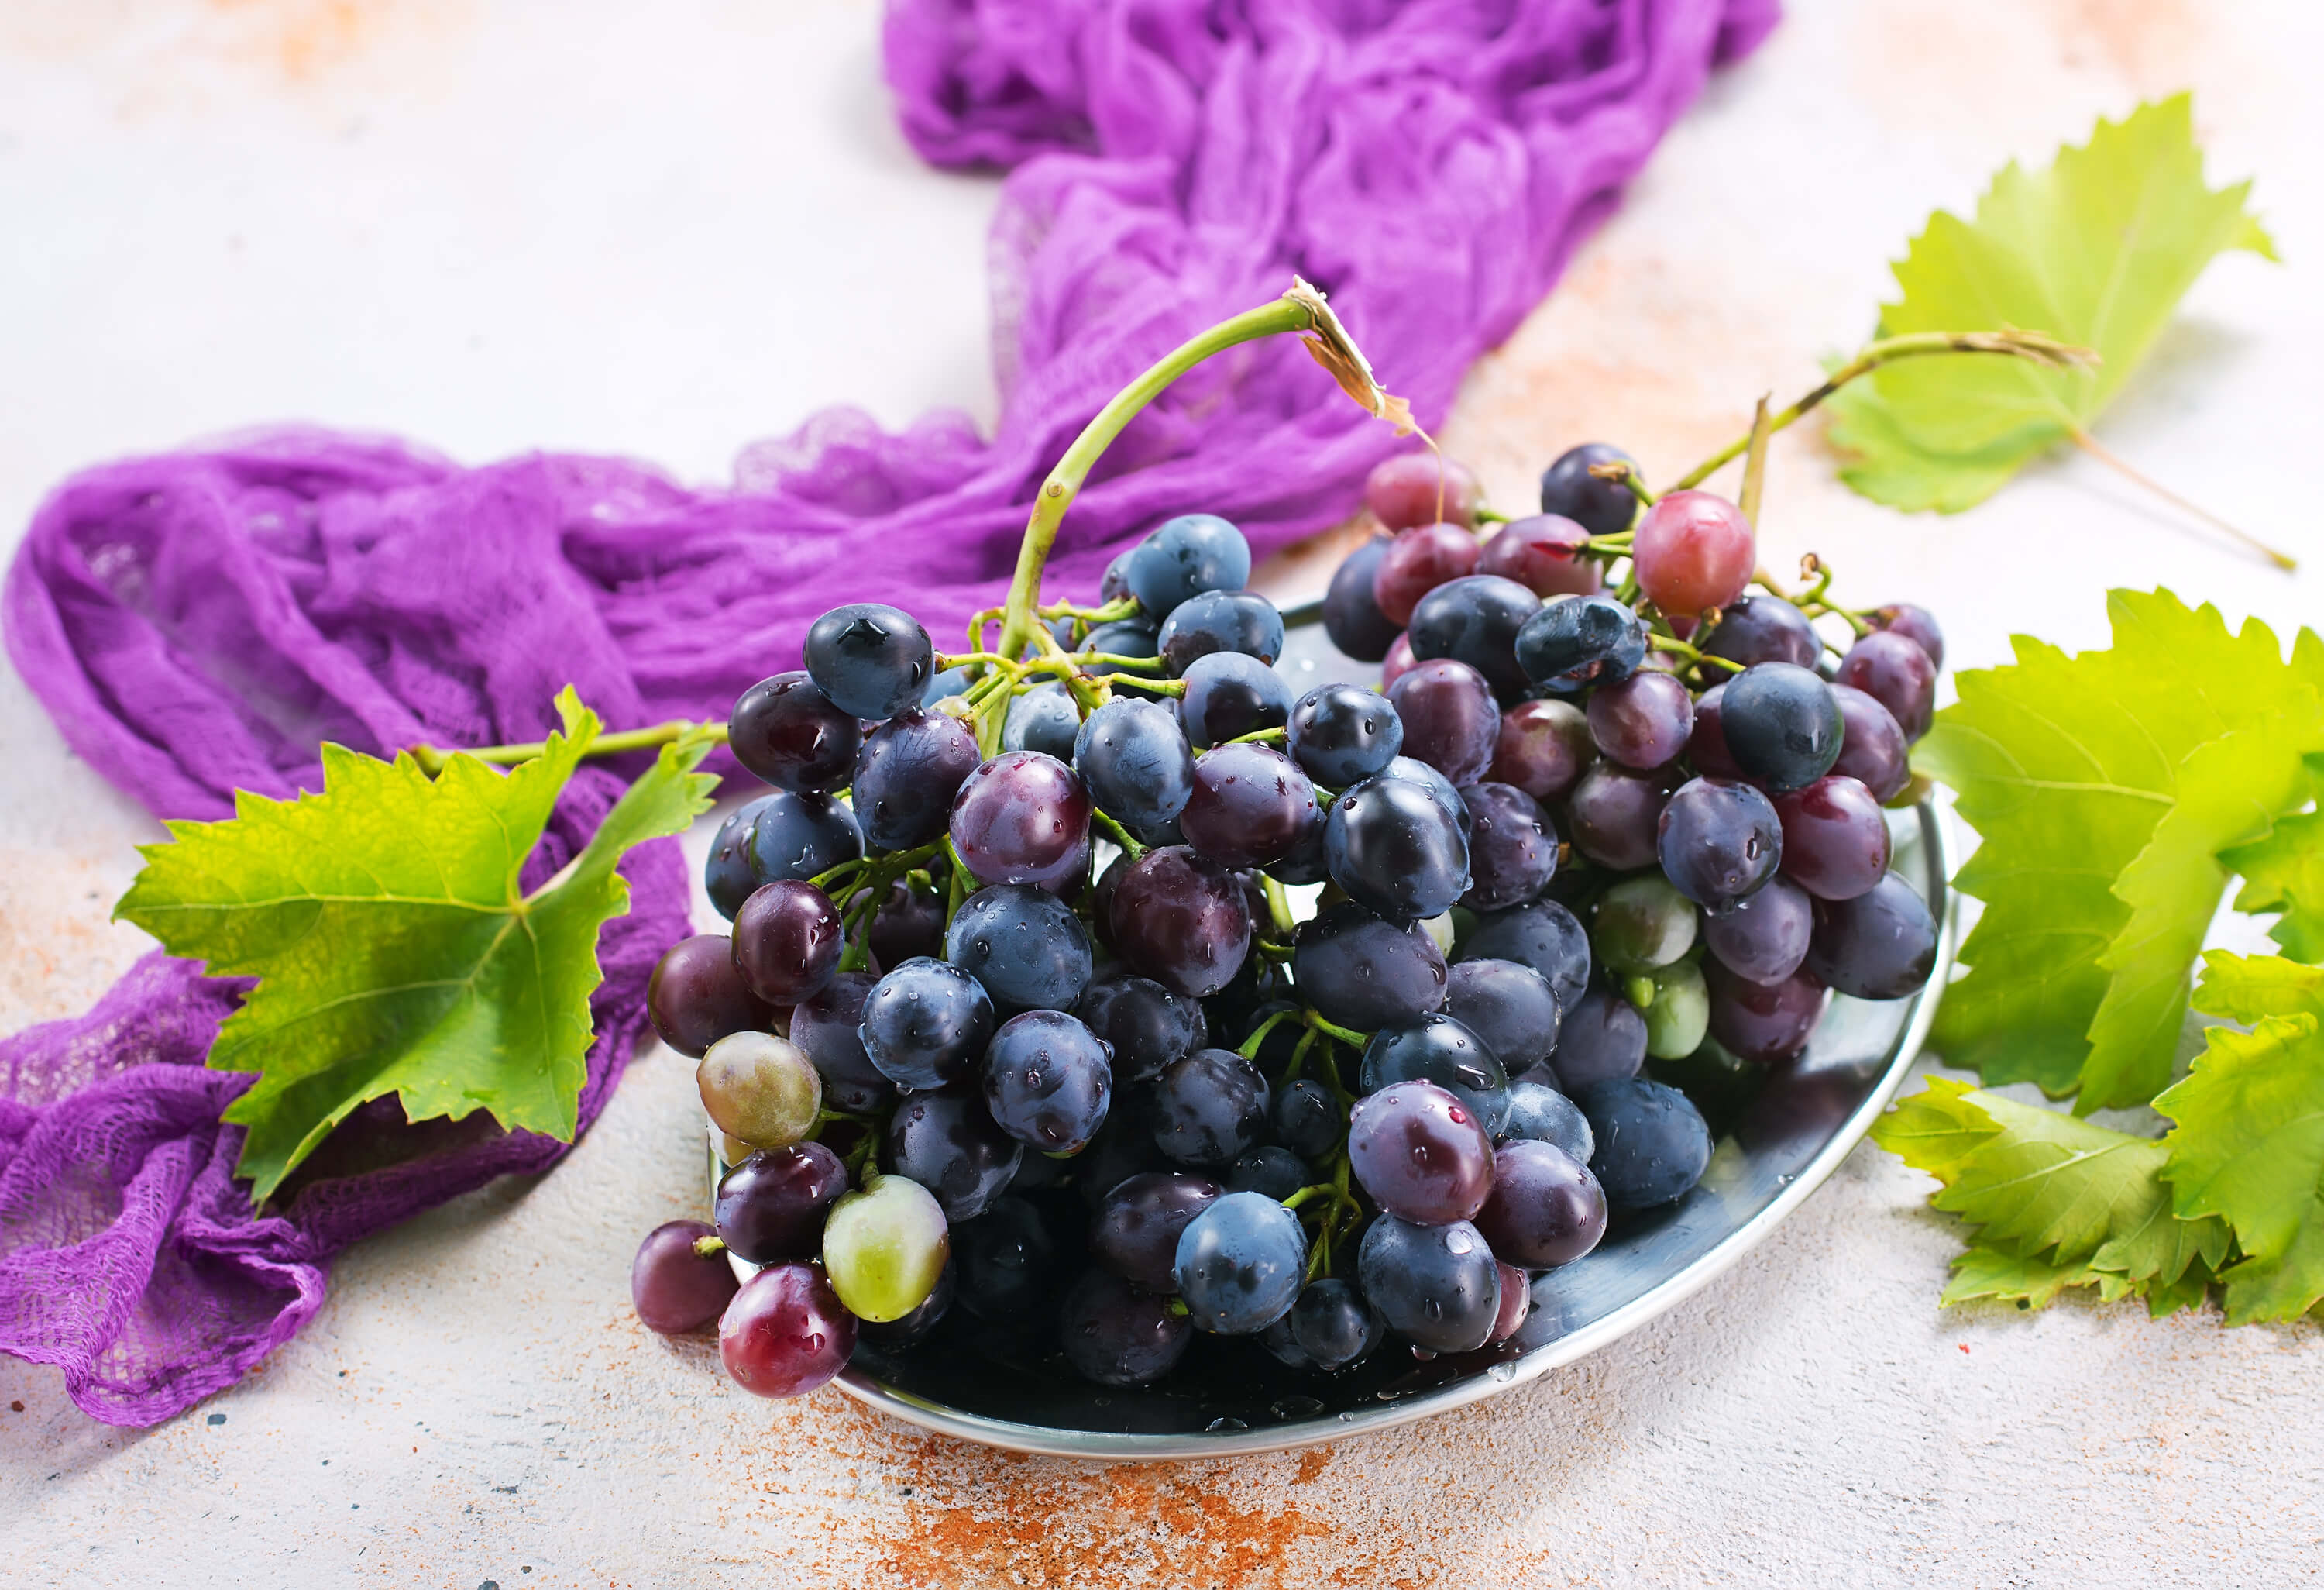 Foods for Brain Health: Grapes